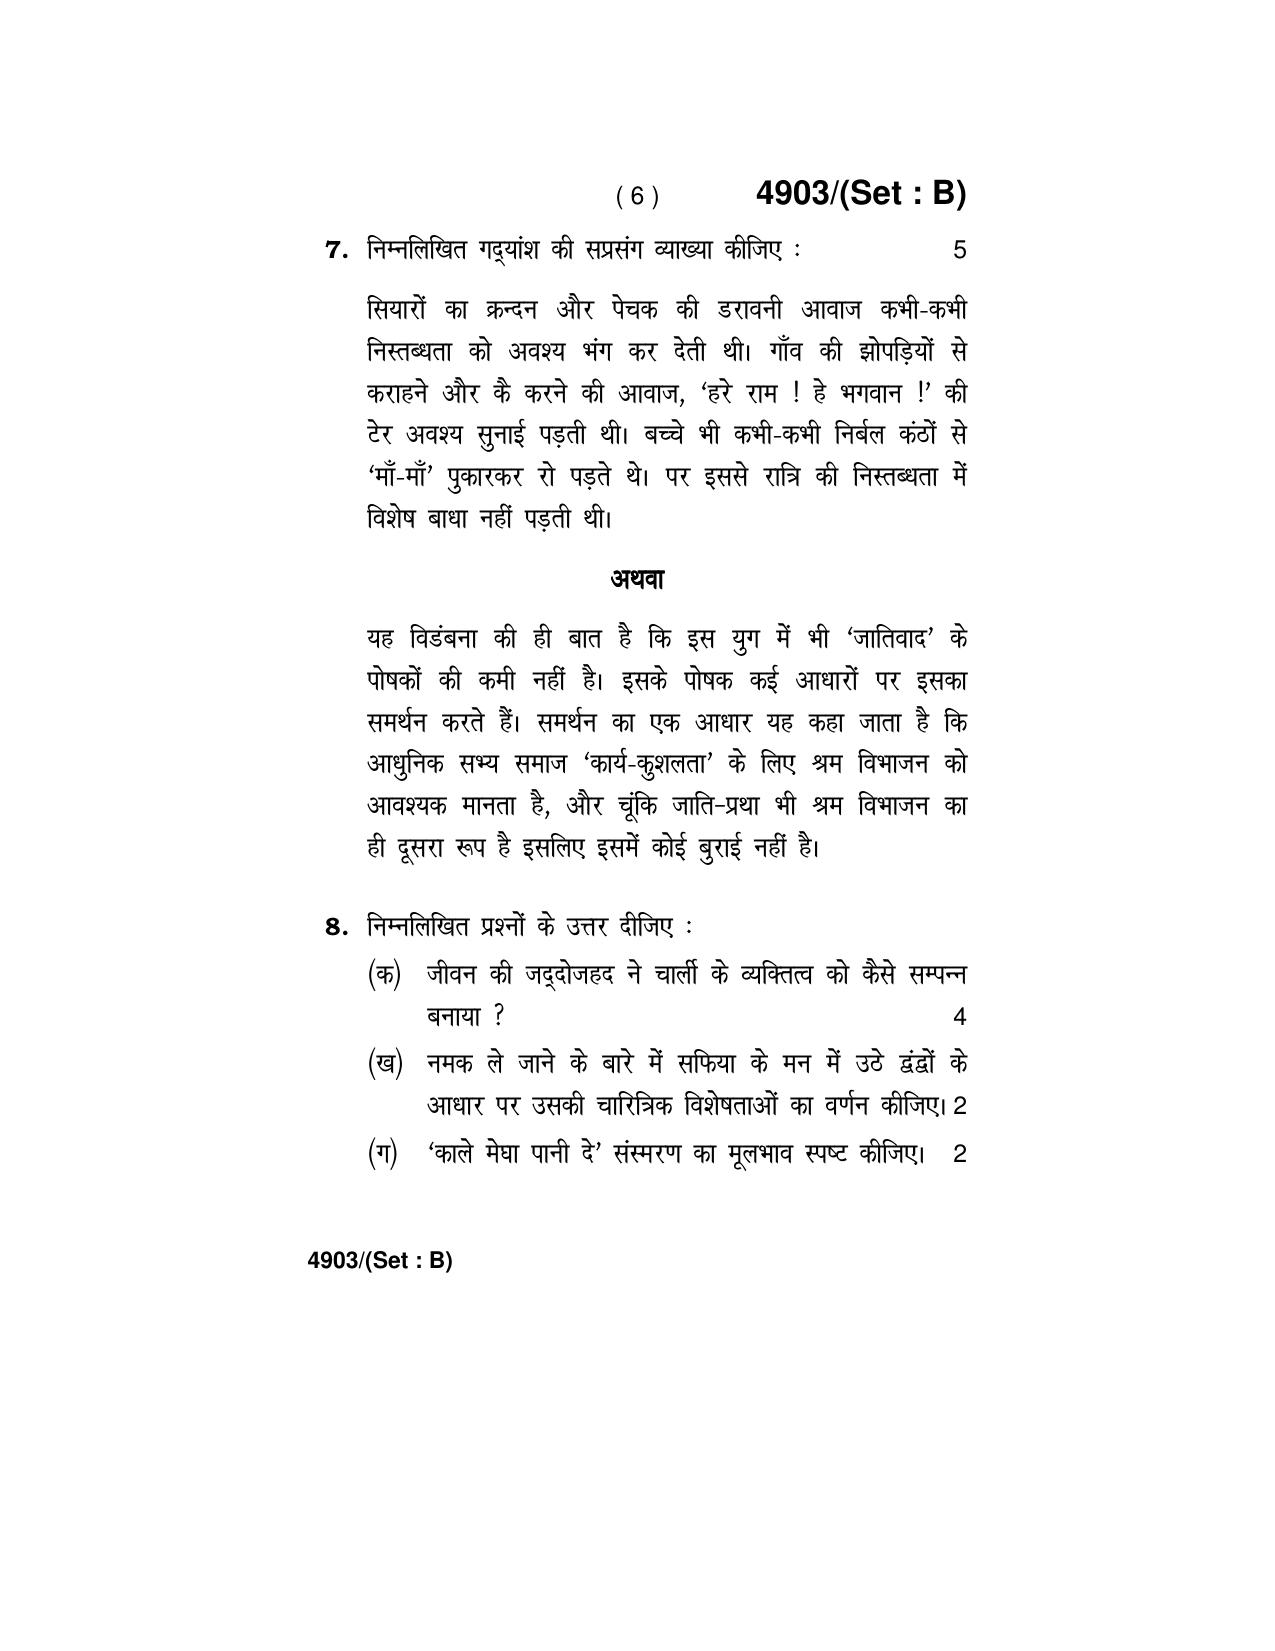 Haryana Board HBSE Class 12 Hindi Core 2020 Question Paper - Page 14